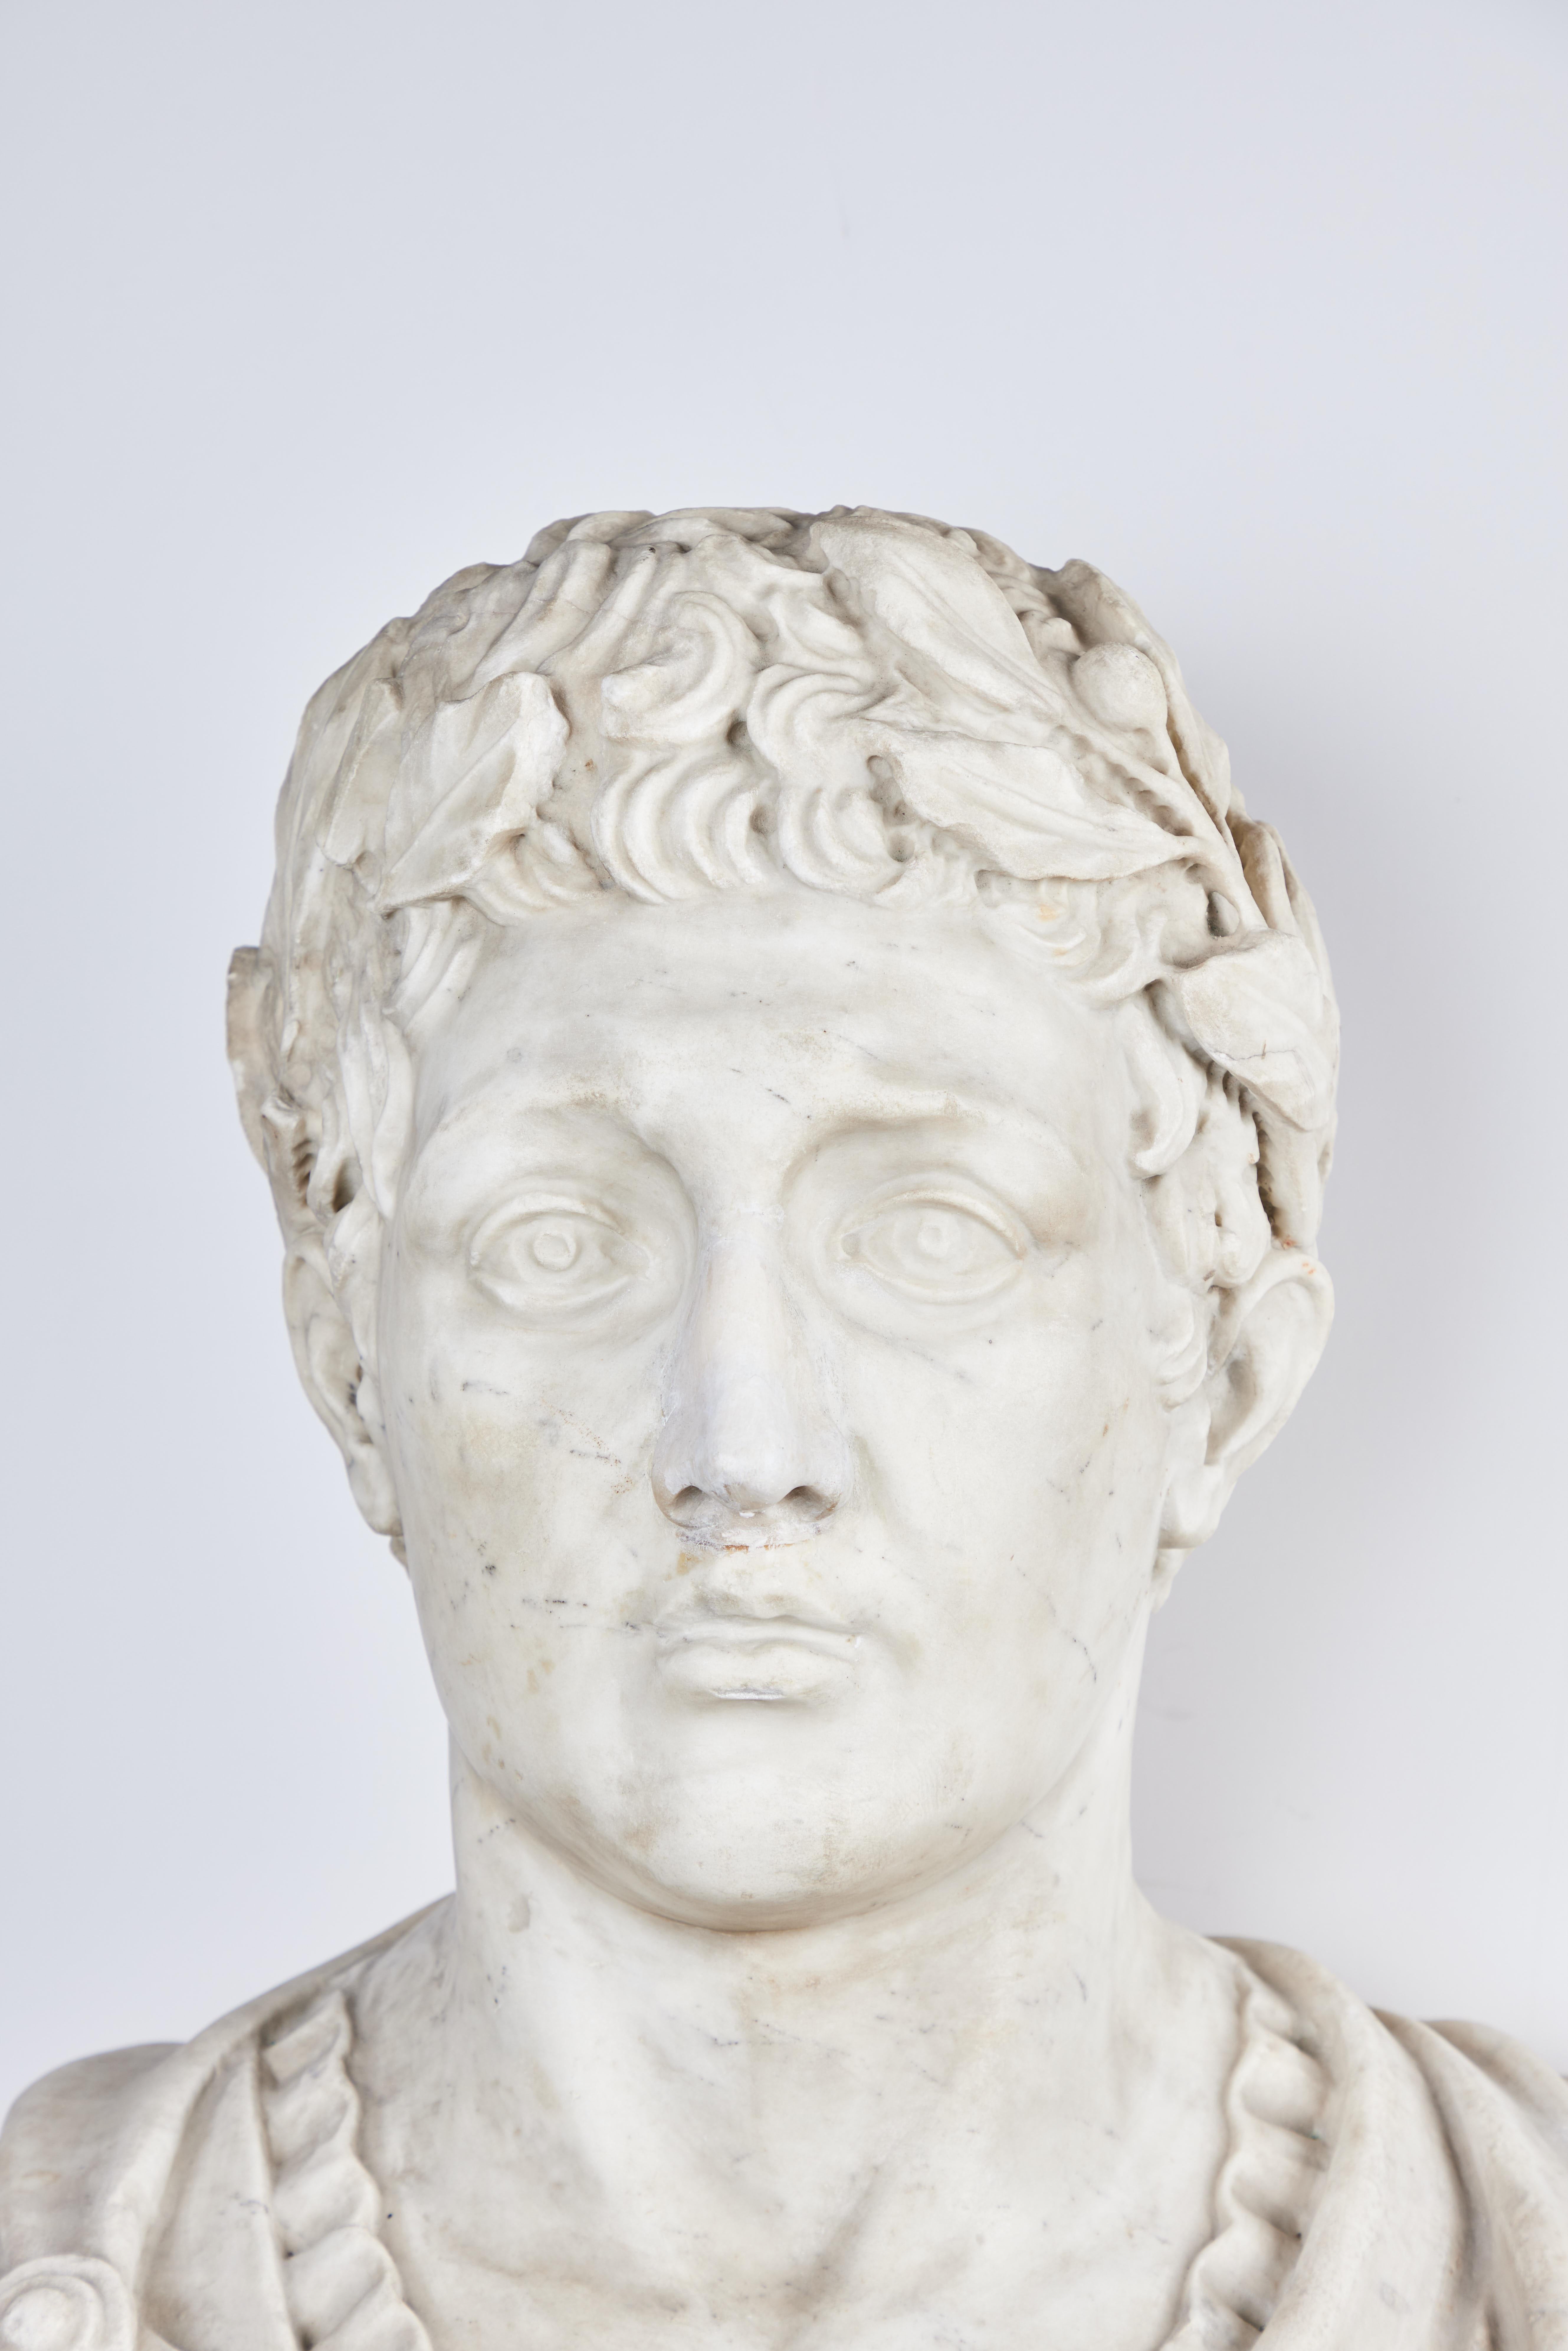 Beautifully hand carved Carrara marble bust of a Roman Emperor on a variegated marble base, elaborately robed with a laurel wreath adorning his head.